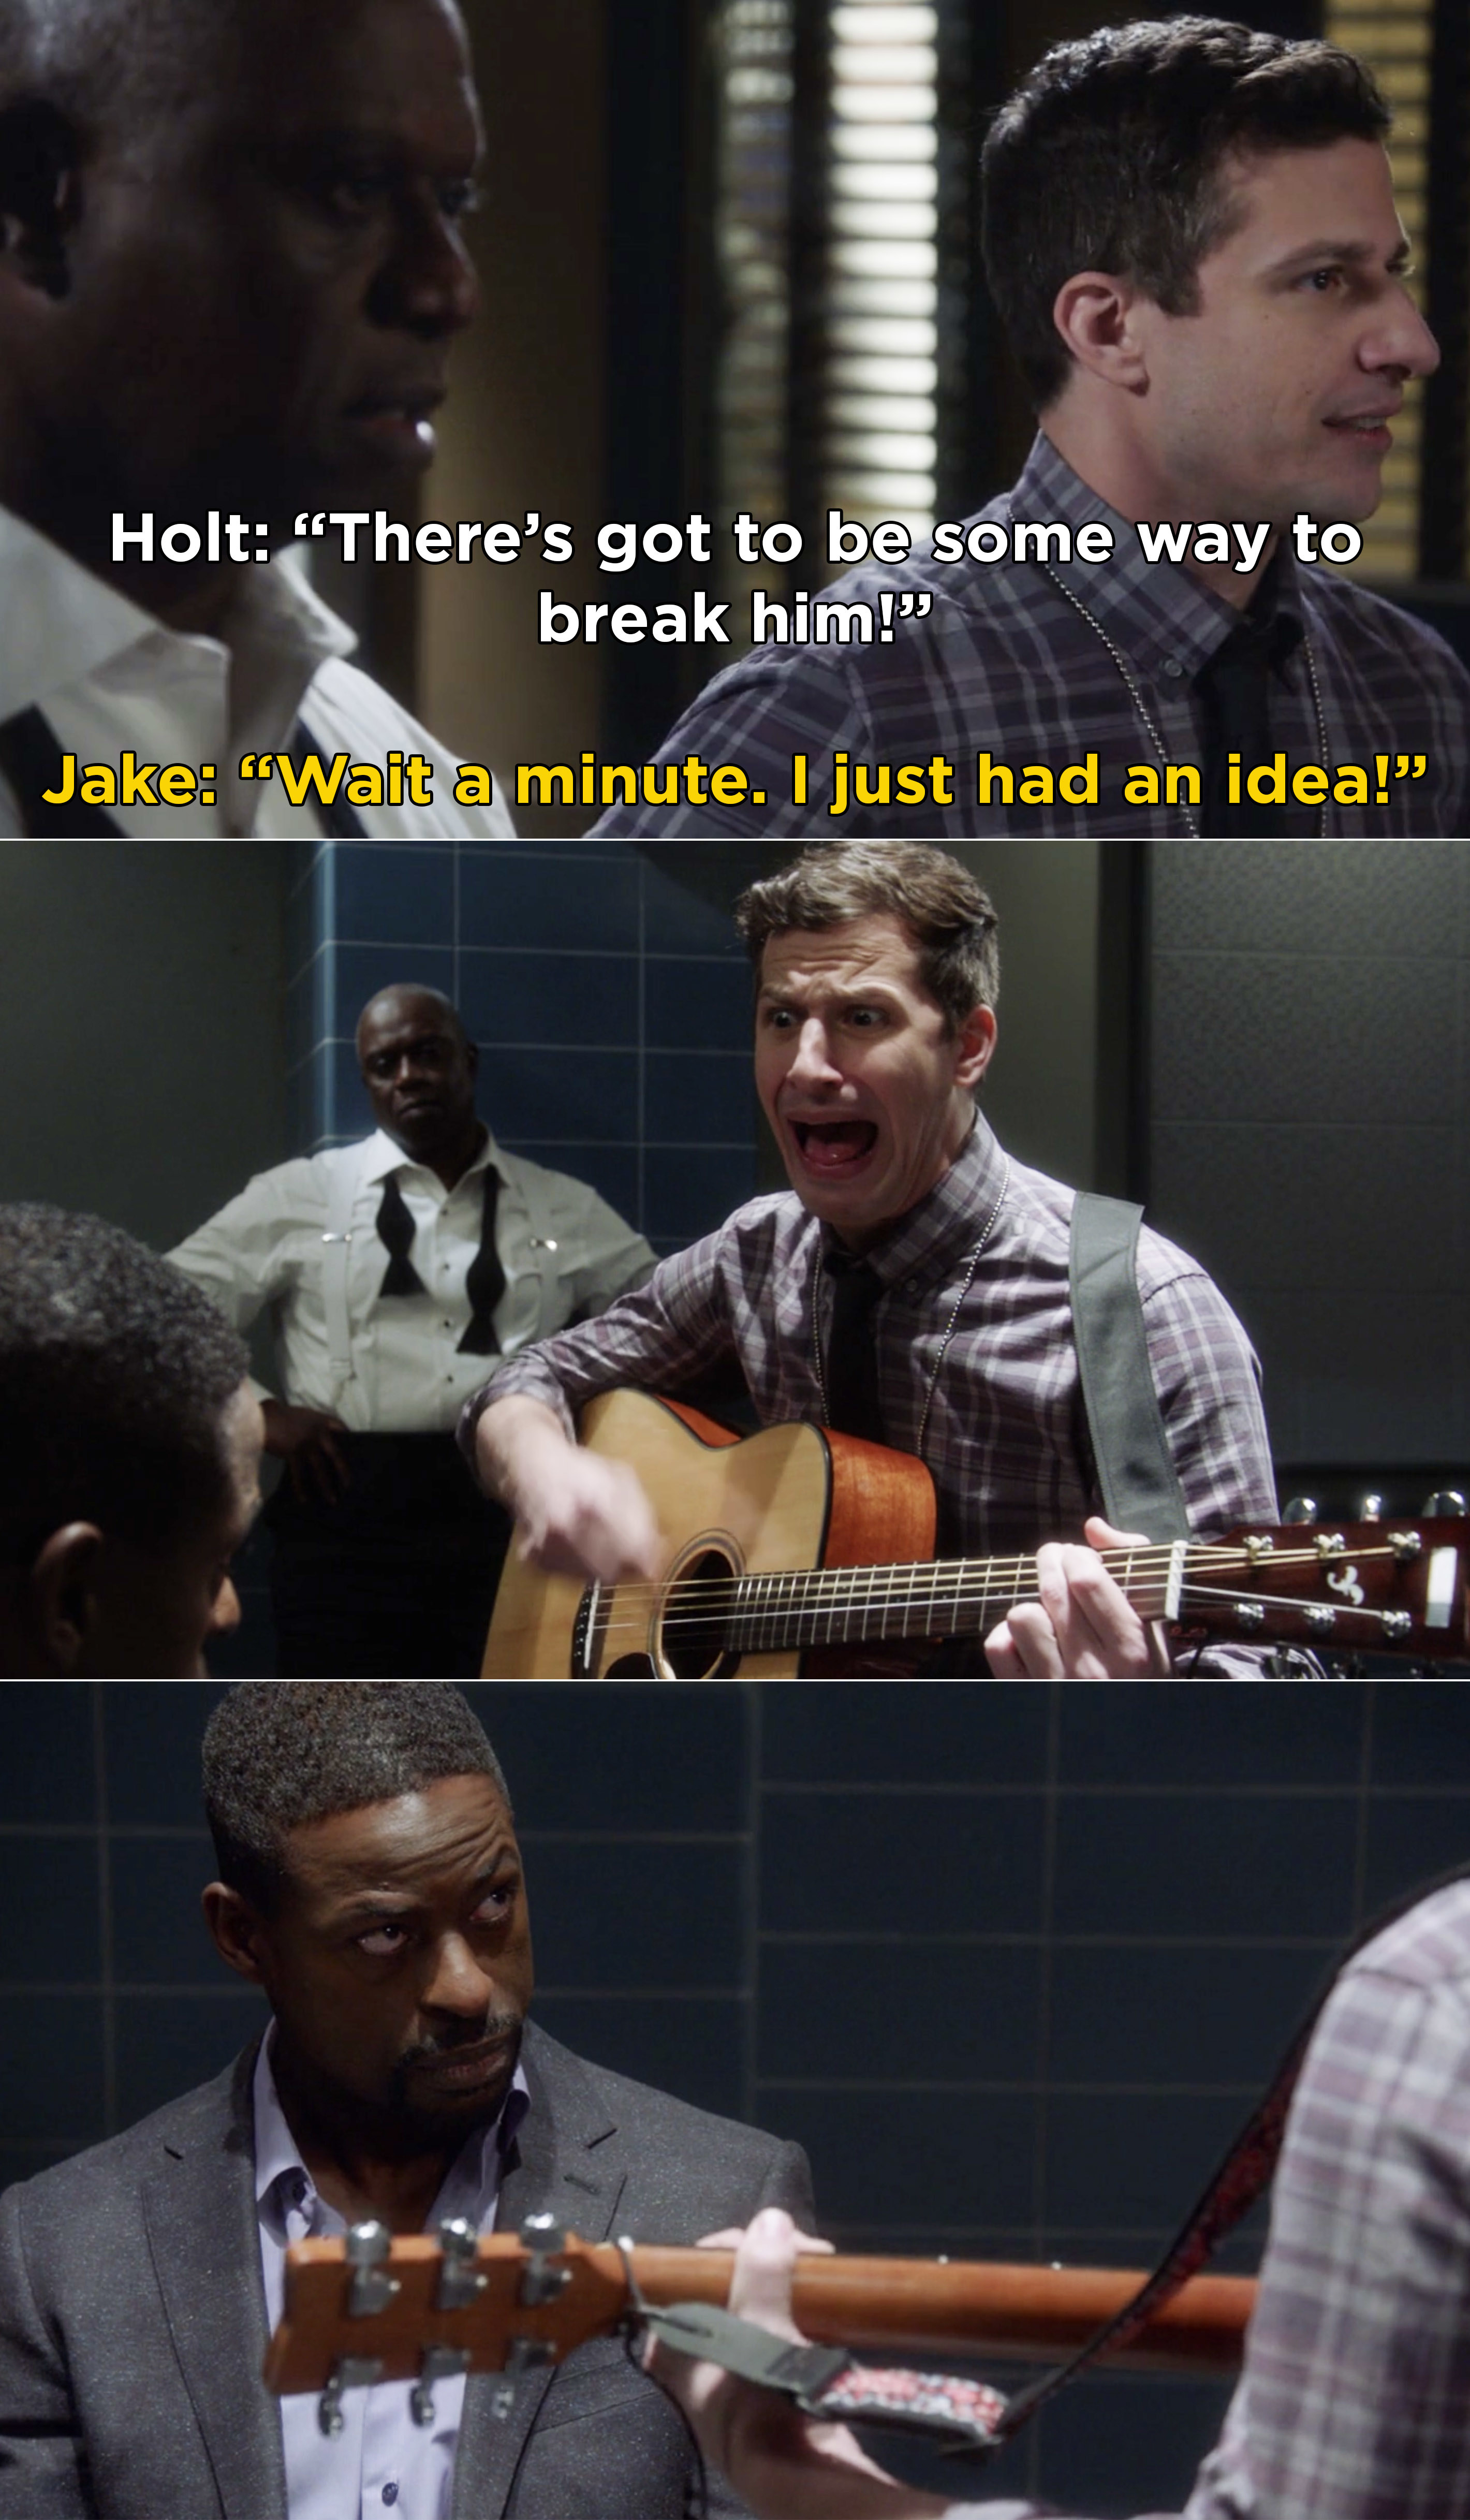 Jake telling Holt he had an idea, then scream-singing to Philip